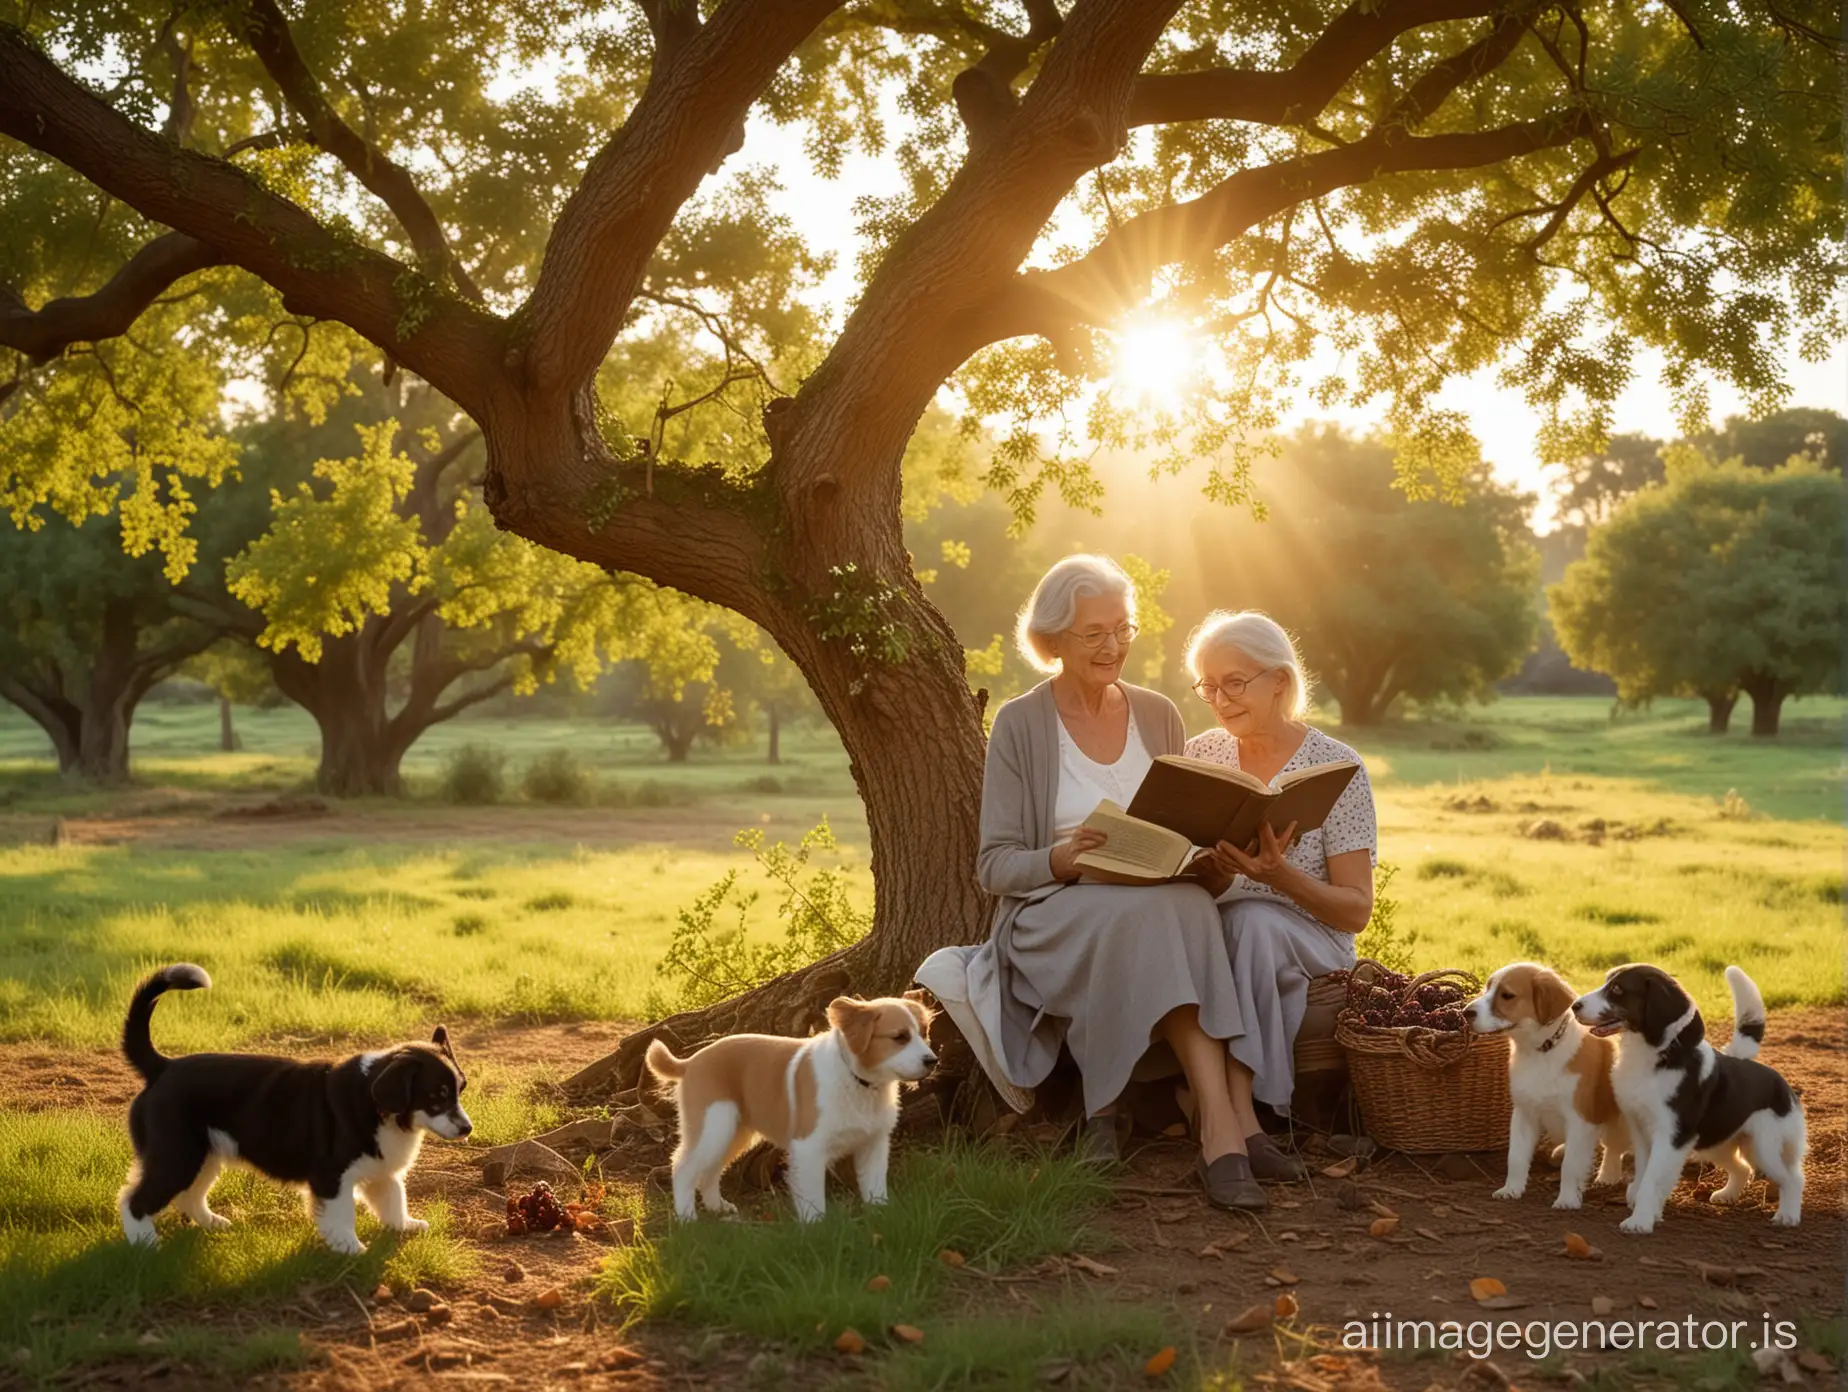 Generate an image of an elderly lady reading a book under a beautiful oak tree. Around her, two playful puppy dogs are chasing each other, and two little girls are picking blackberries directly from the bush. The atmosphere is idyllic, with the setting sun casting its warm light filtering through the oak tree branches.